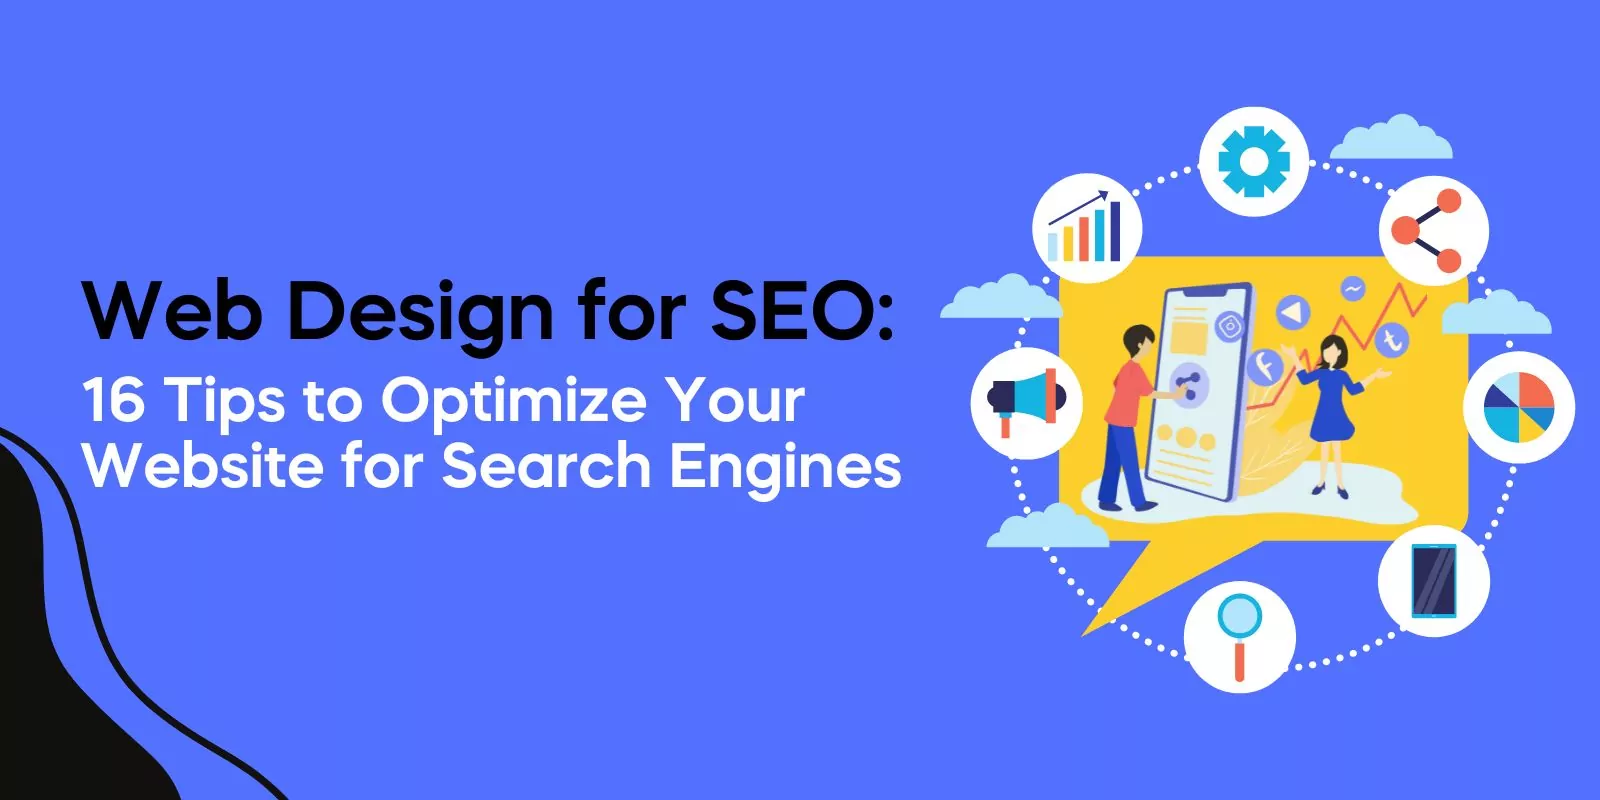 Web Design for SEO: 16 Tips to Optimize Your Website for Search Engines